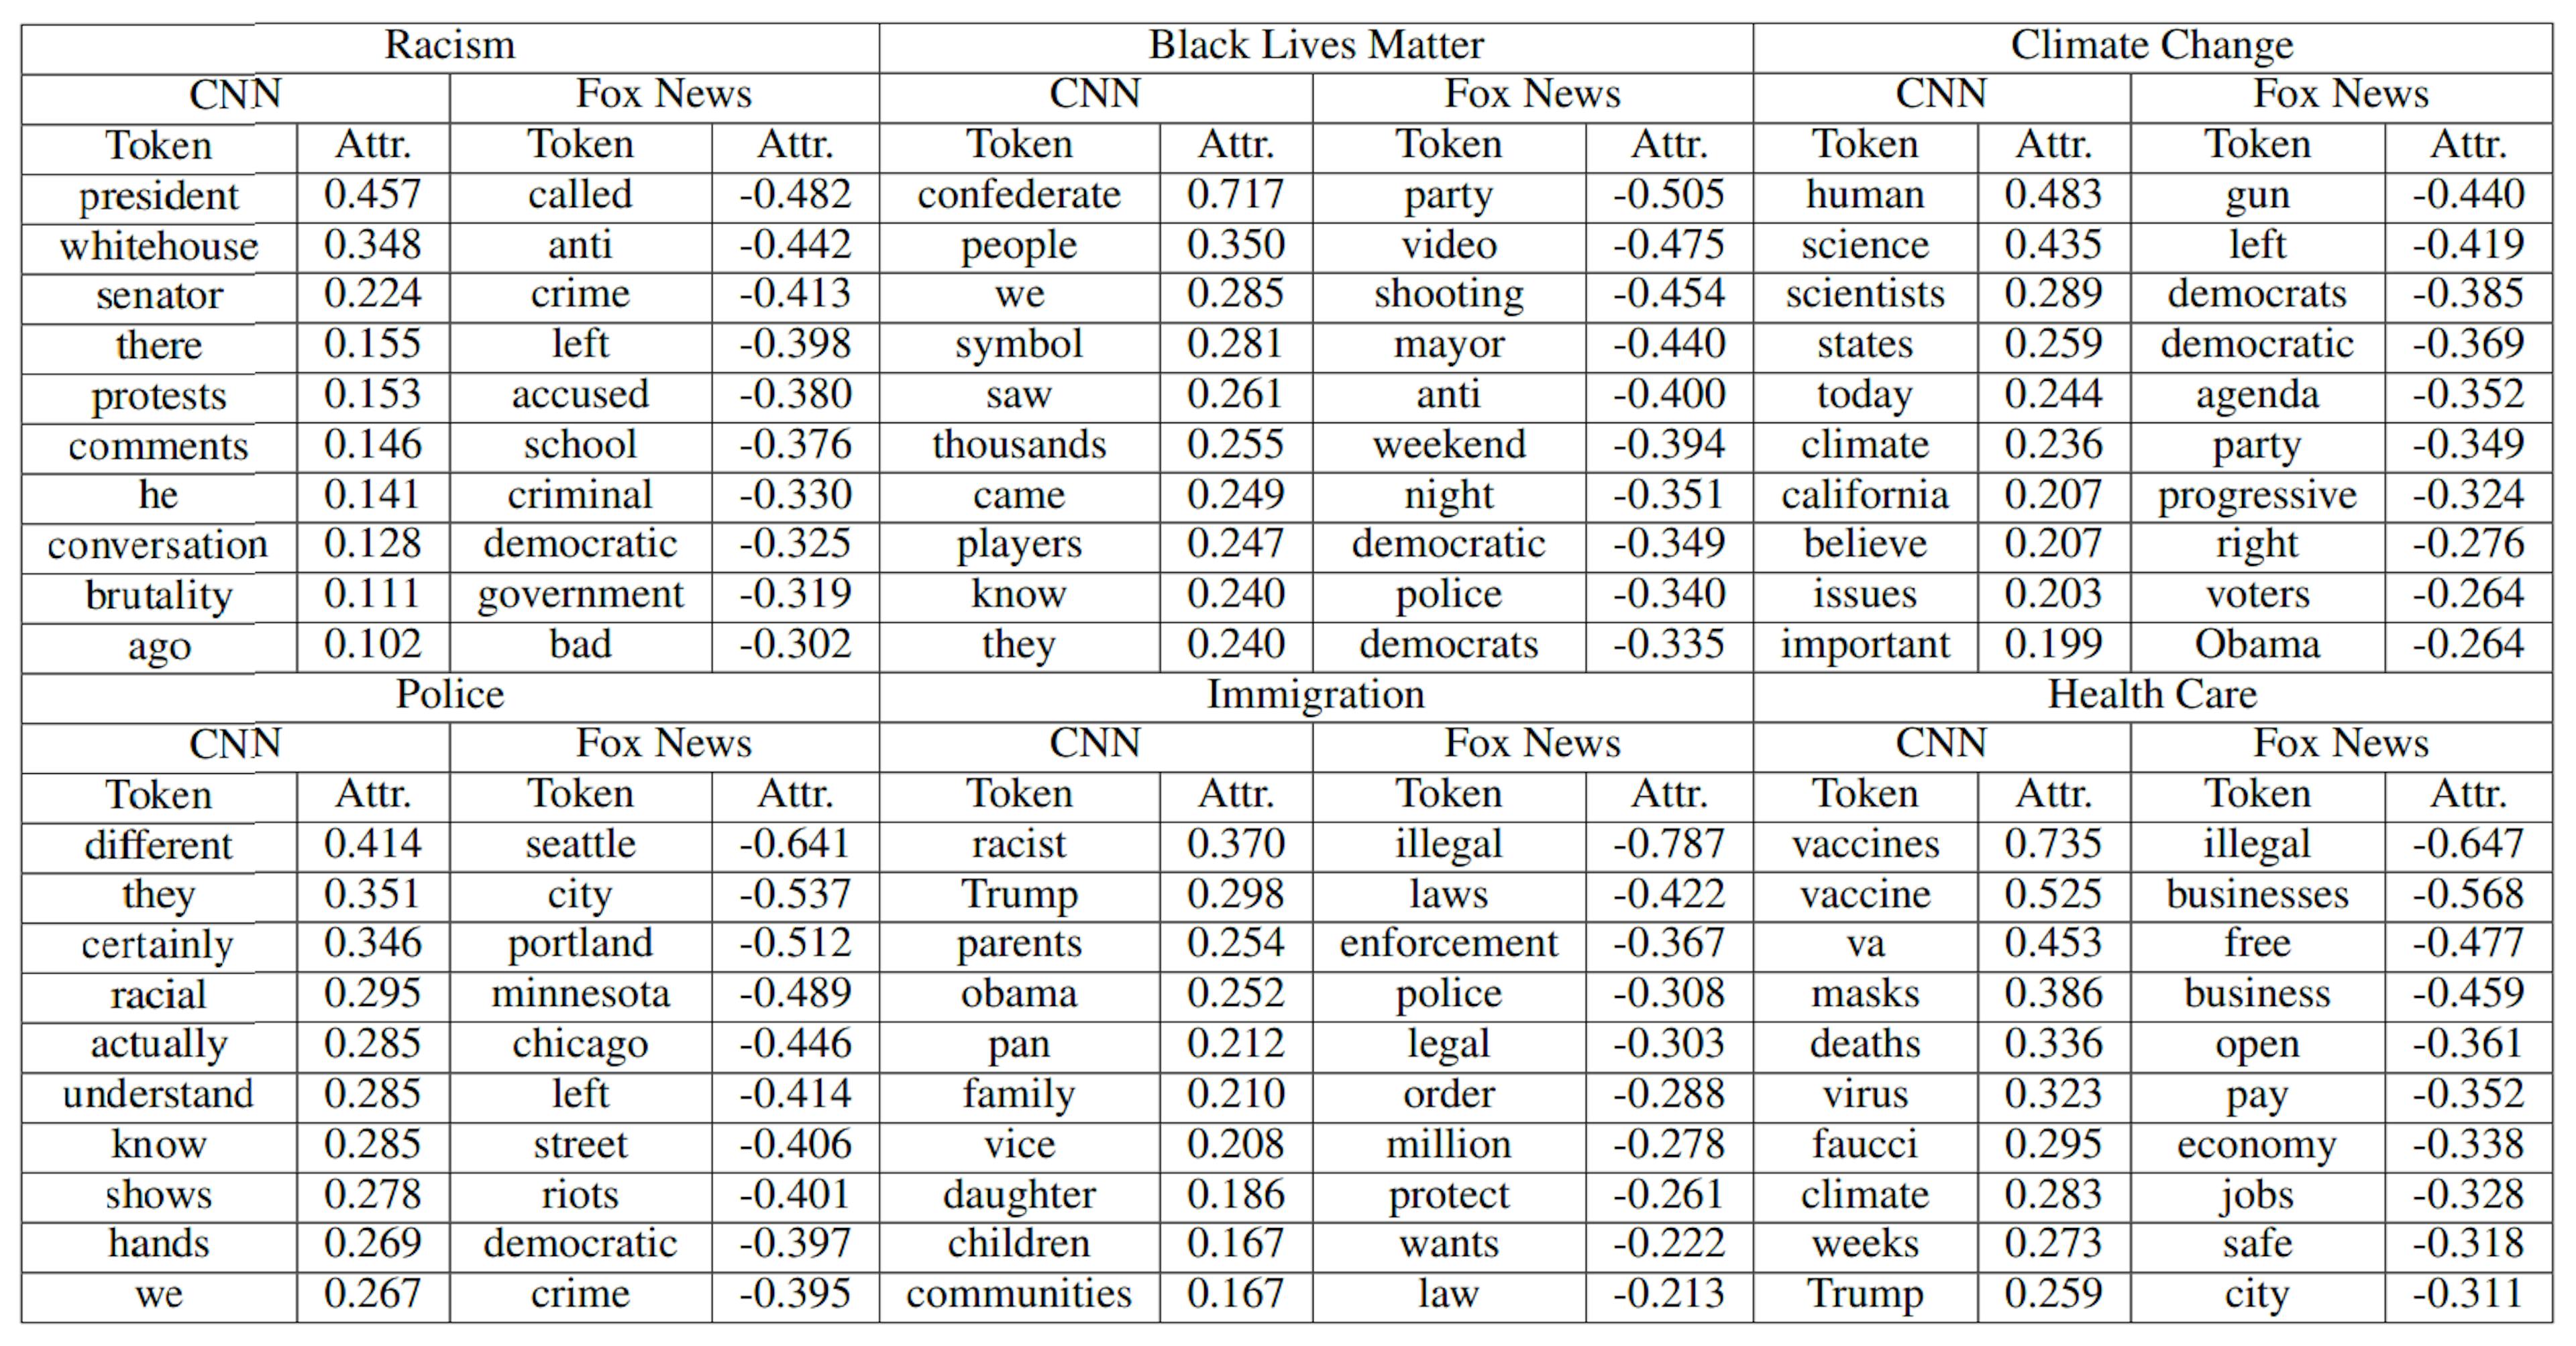 Table 4: Top 10 tokens with the highest (attributed to CNN) and lowest (attributed to Fox News) attribution scores as a proxy for understanding words that linguistically characterize the 2020 semantic polarity between Fox News and CNN across six topics.